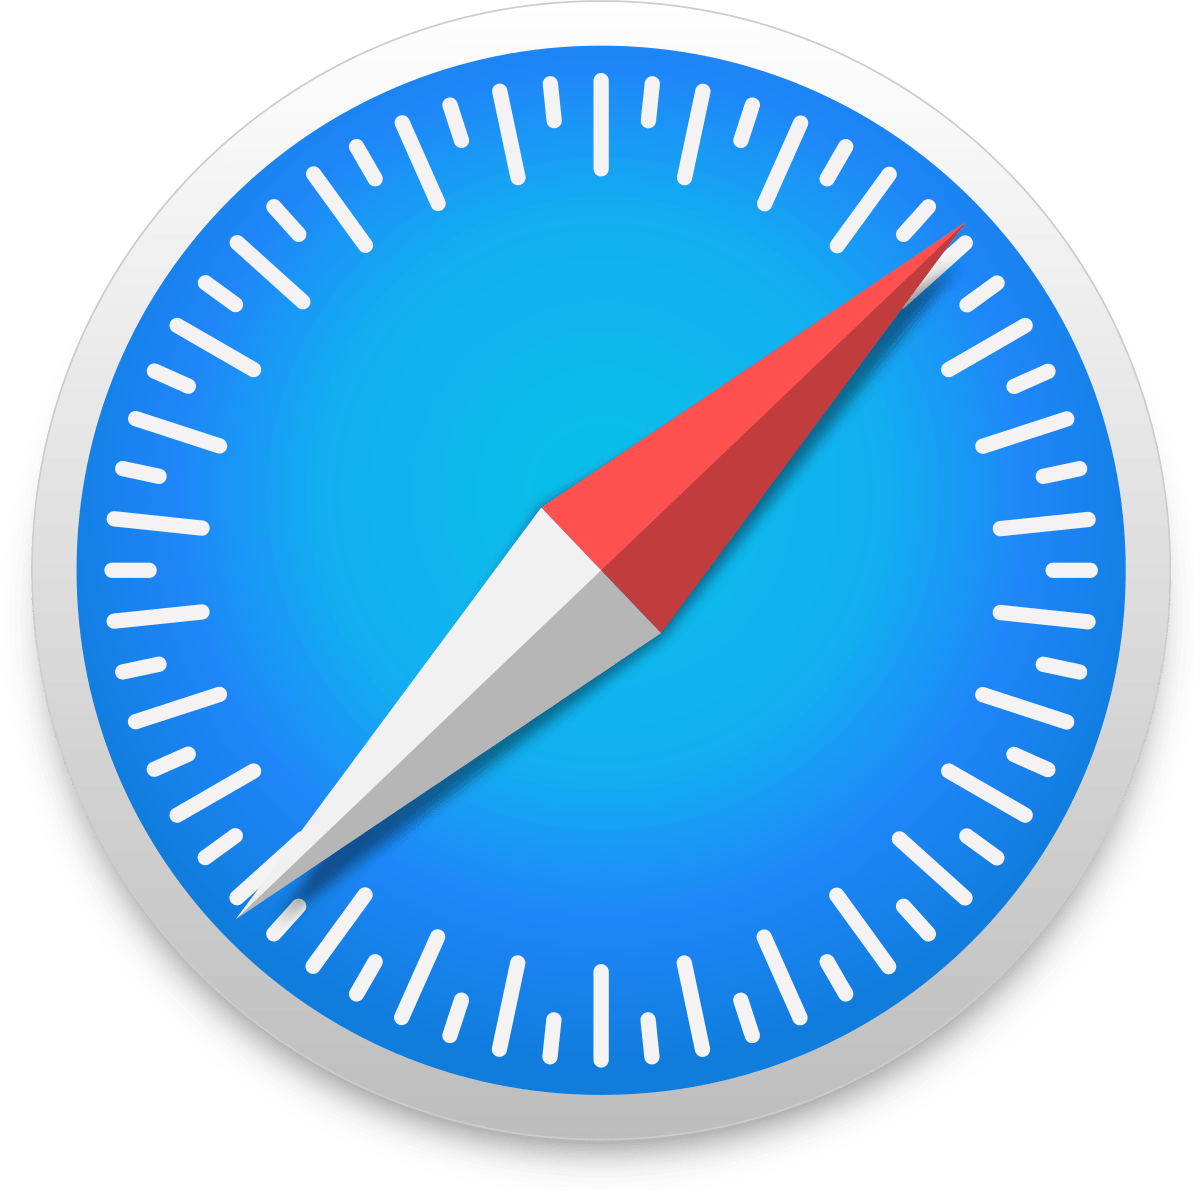 Safari browser logo : a blue compass with a red and white needle